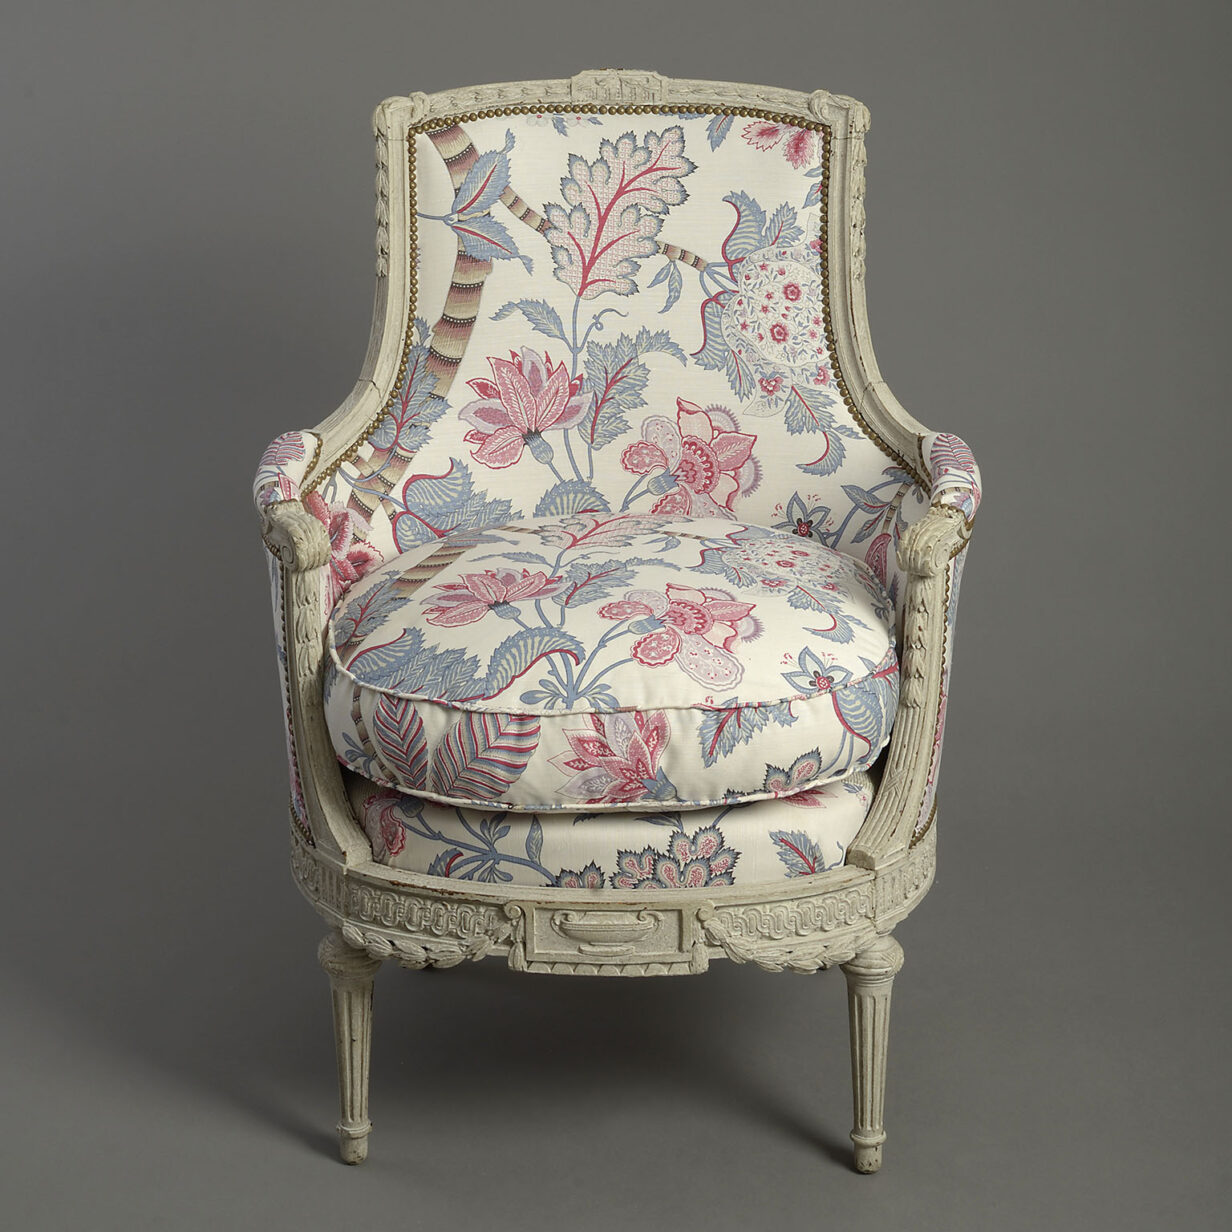 19th century carved painted louis xvi style bergere